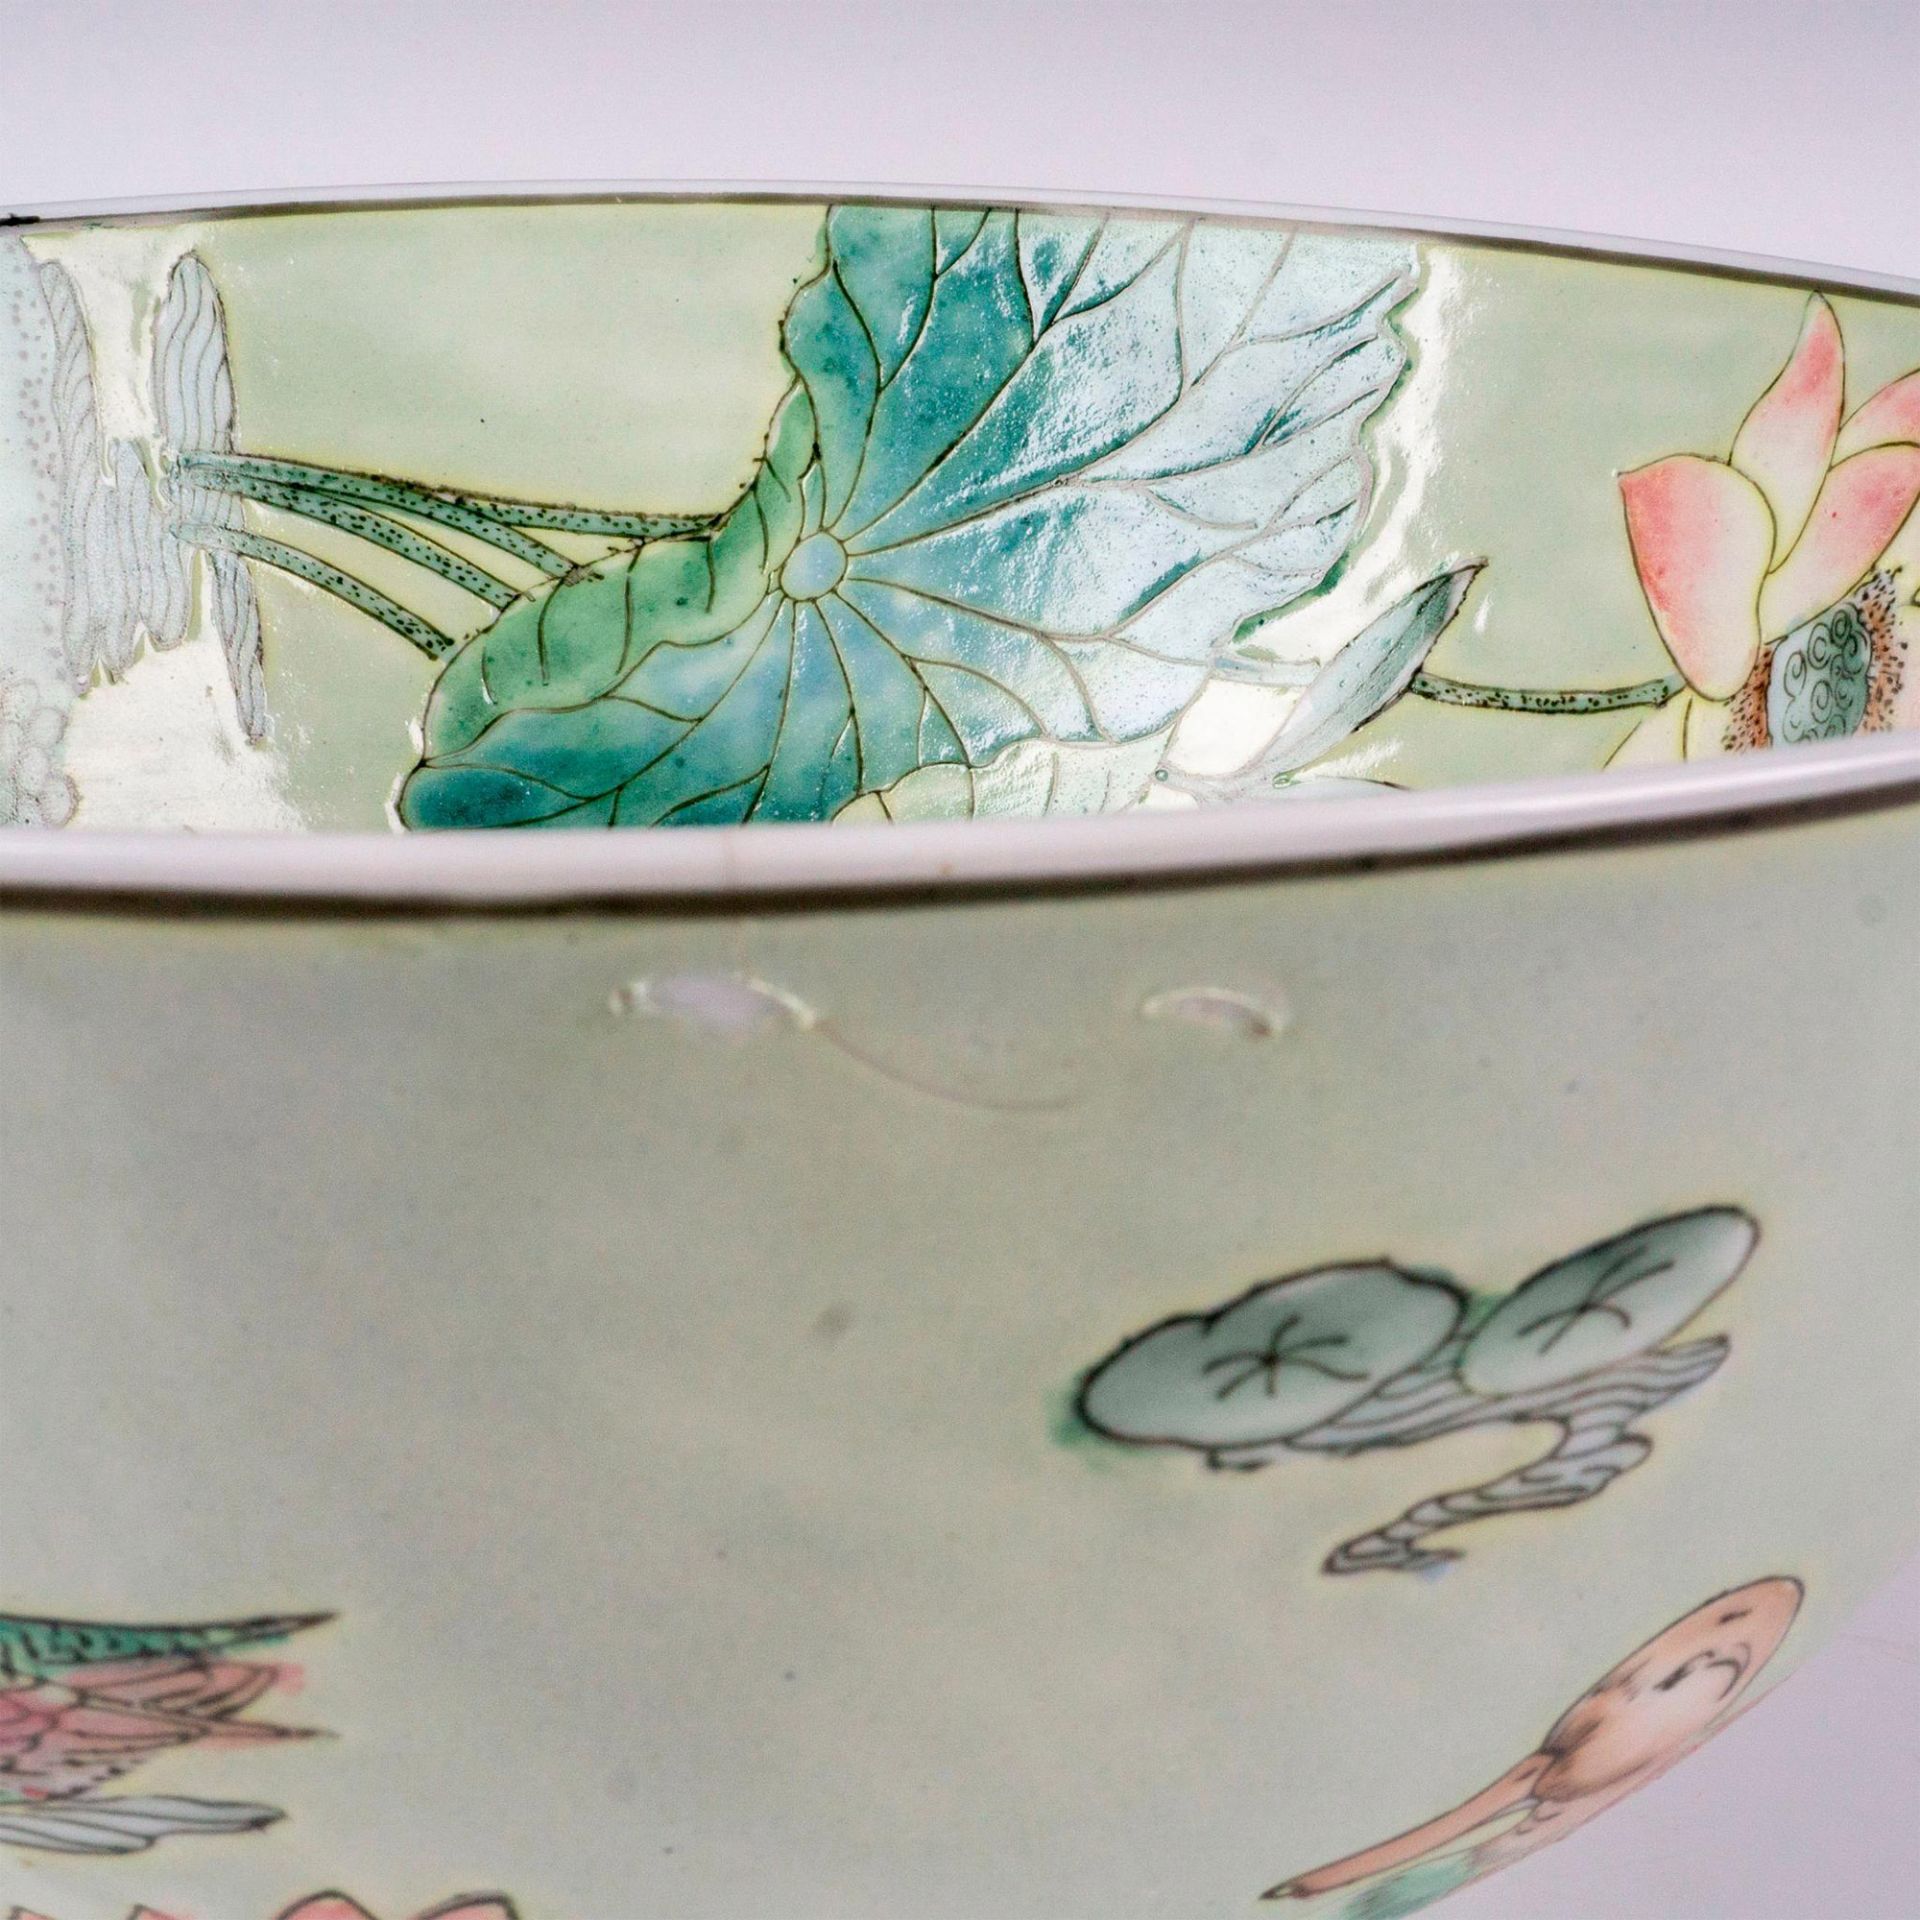 Chinese Porcelain Celadon Painted Duck Bowl - Image 5 of 5